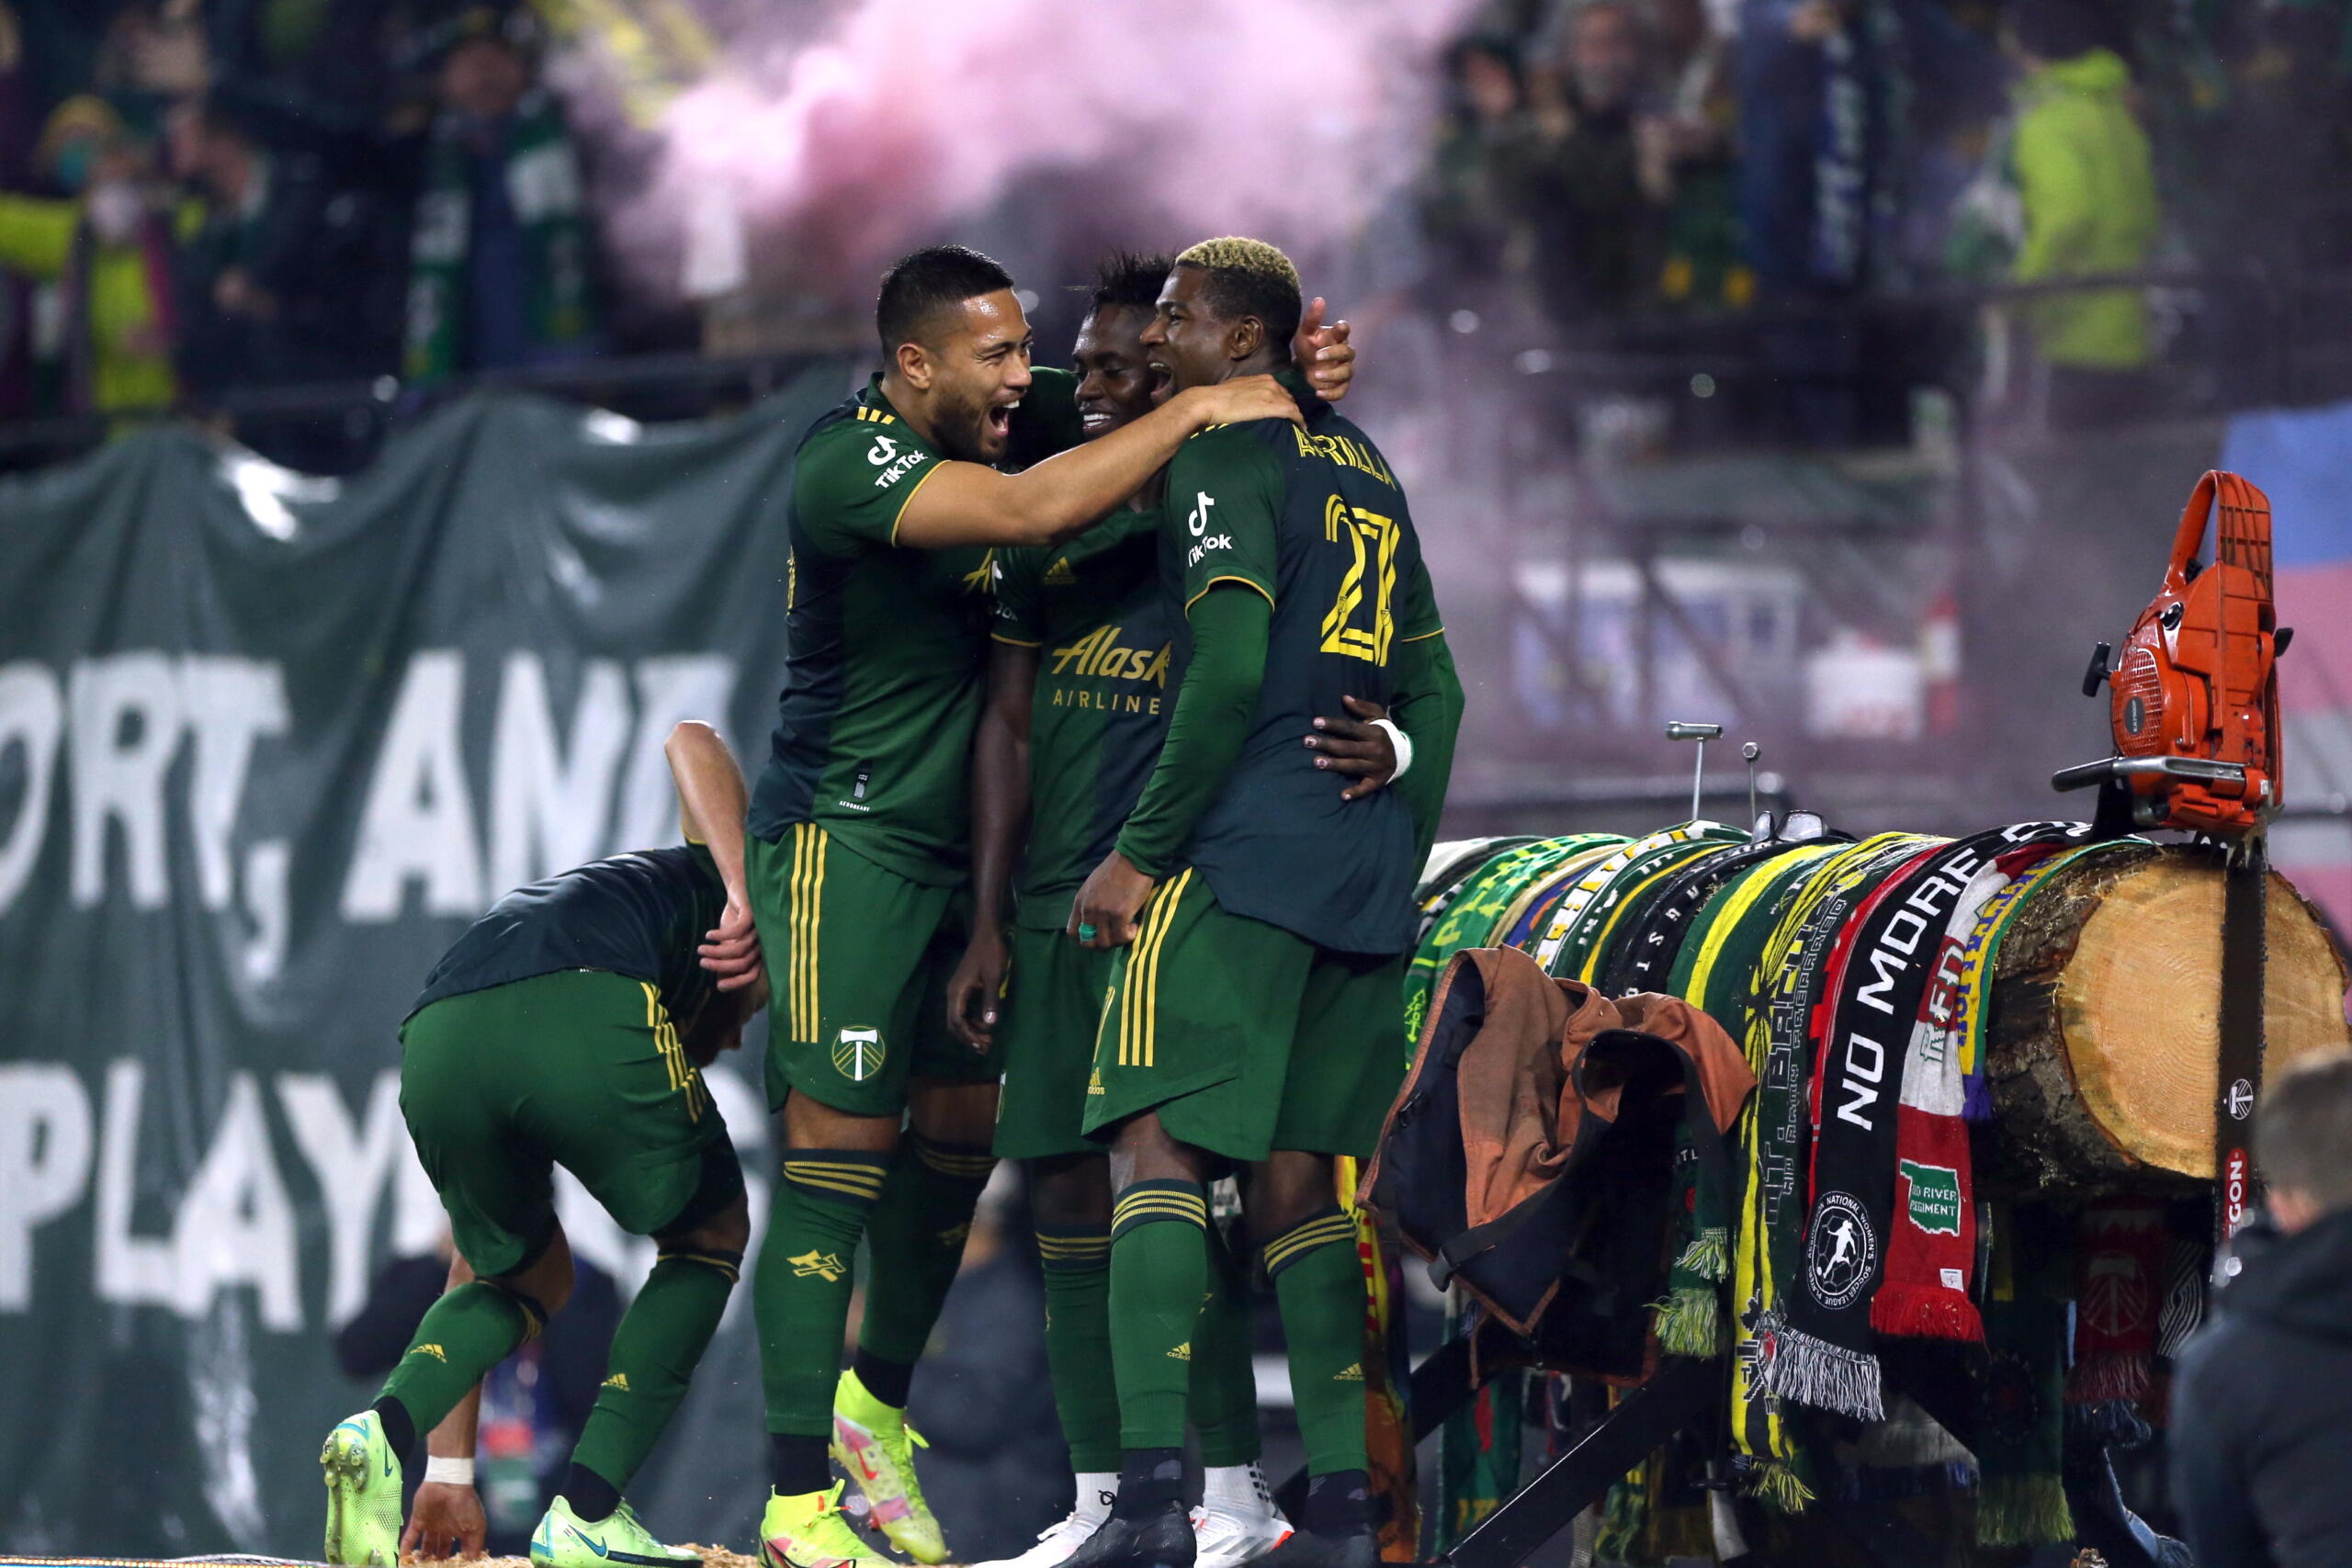 Portland Timbers forward Dairon Asprilla (27) celebrates with teammates after his goal during an MLS soccer game against the San Jose Earthquakes Wednesday, Oct. 27, 2021 in Portland, Ore.